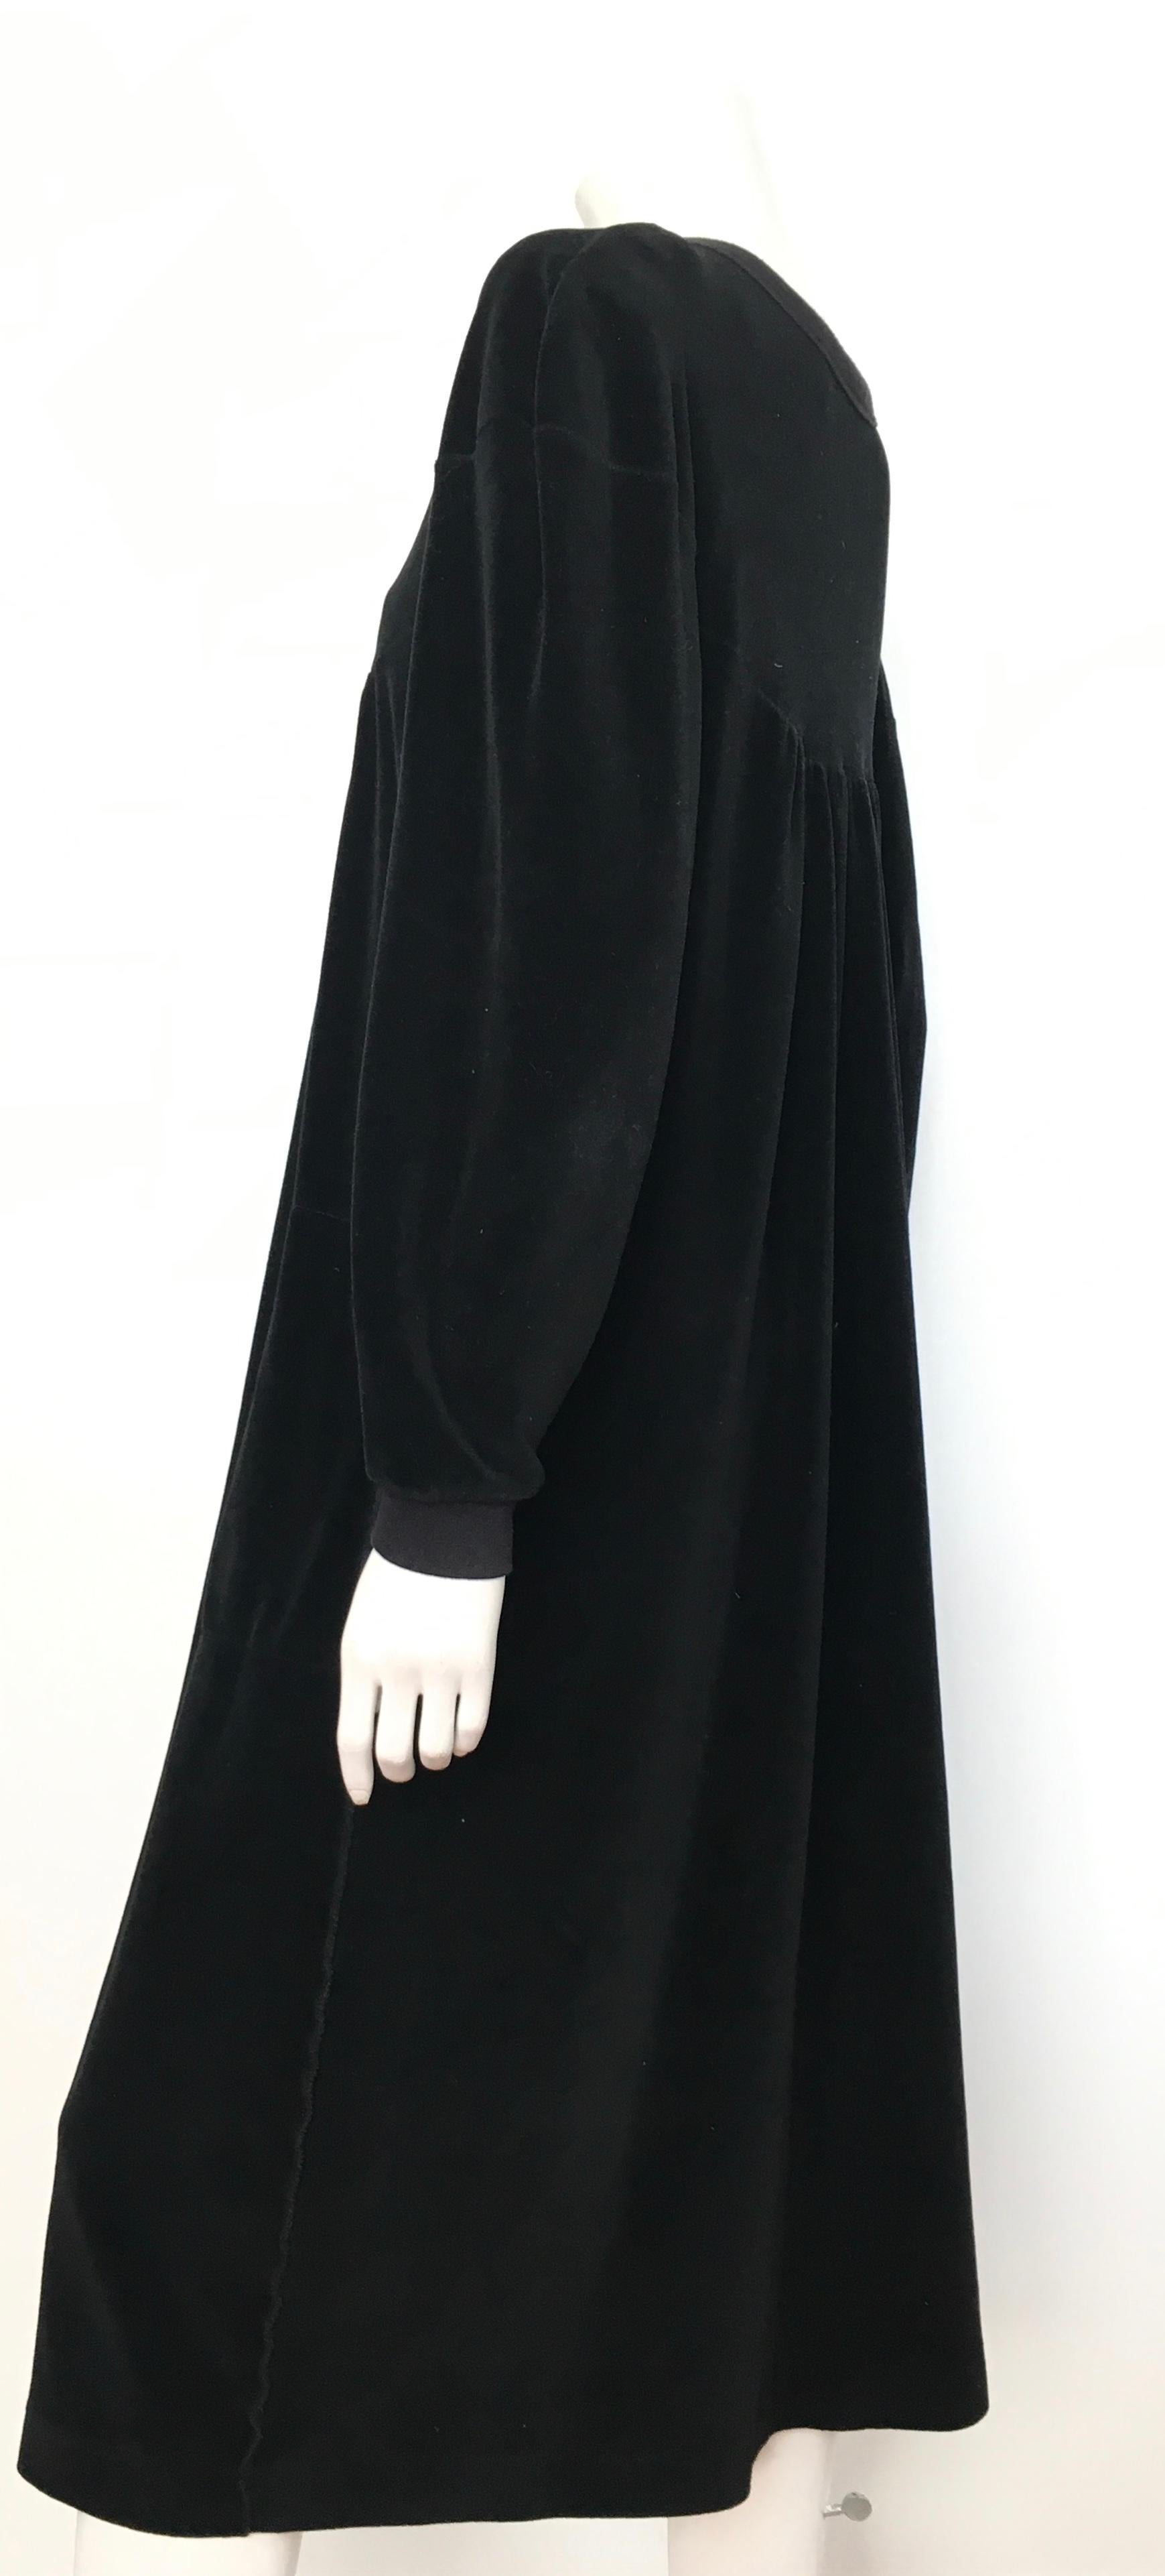 Sonia Rykiel 1980s Black Velour Dress with Pockets & Cardigan Size Large. For Sale 6